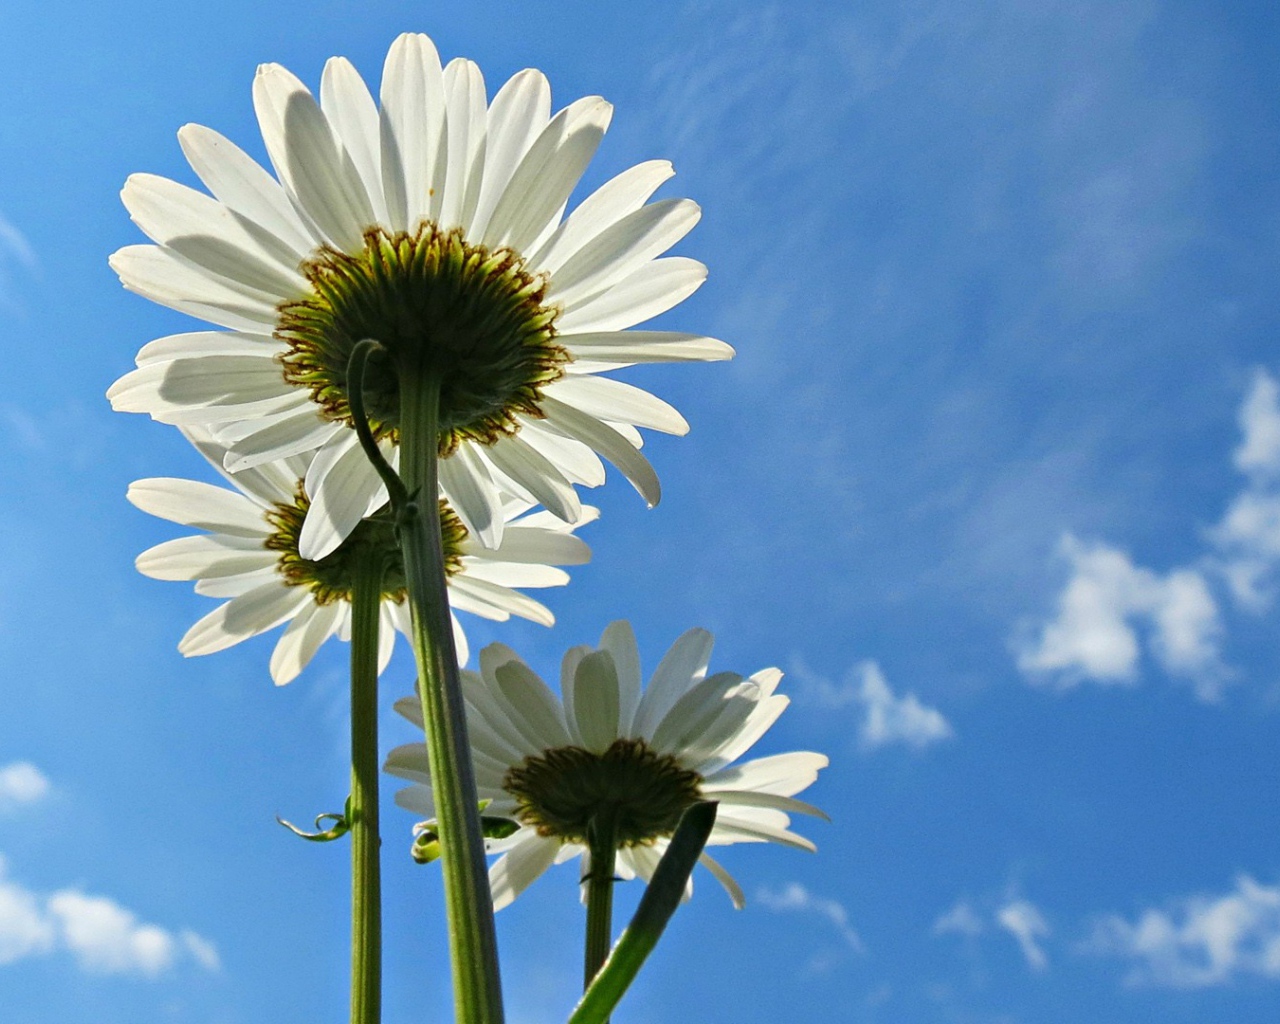 Three white daisies on a blue sky background